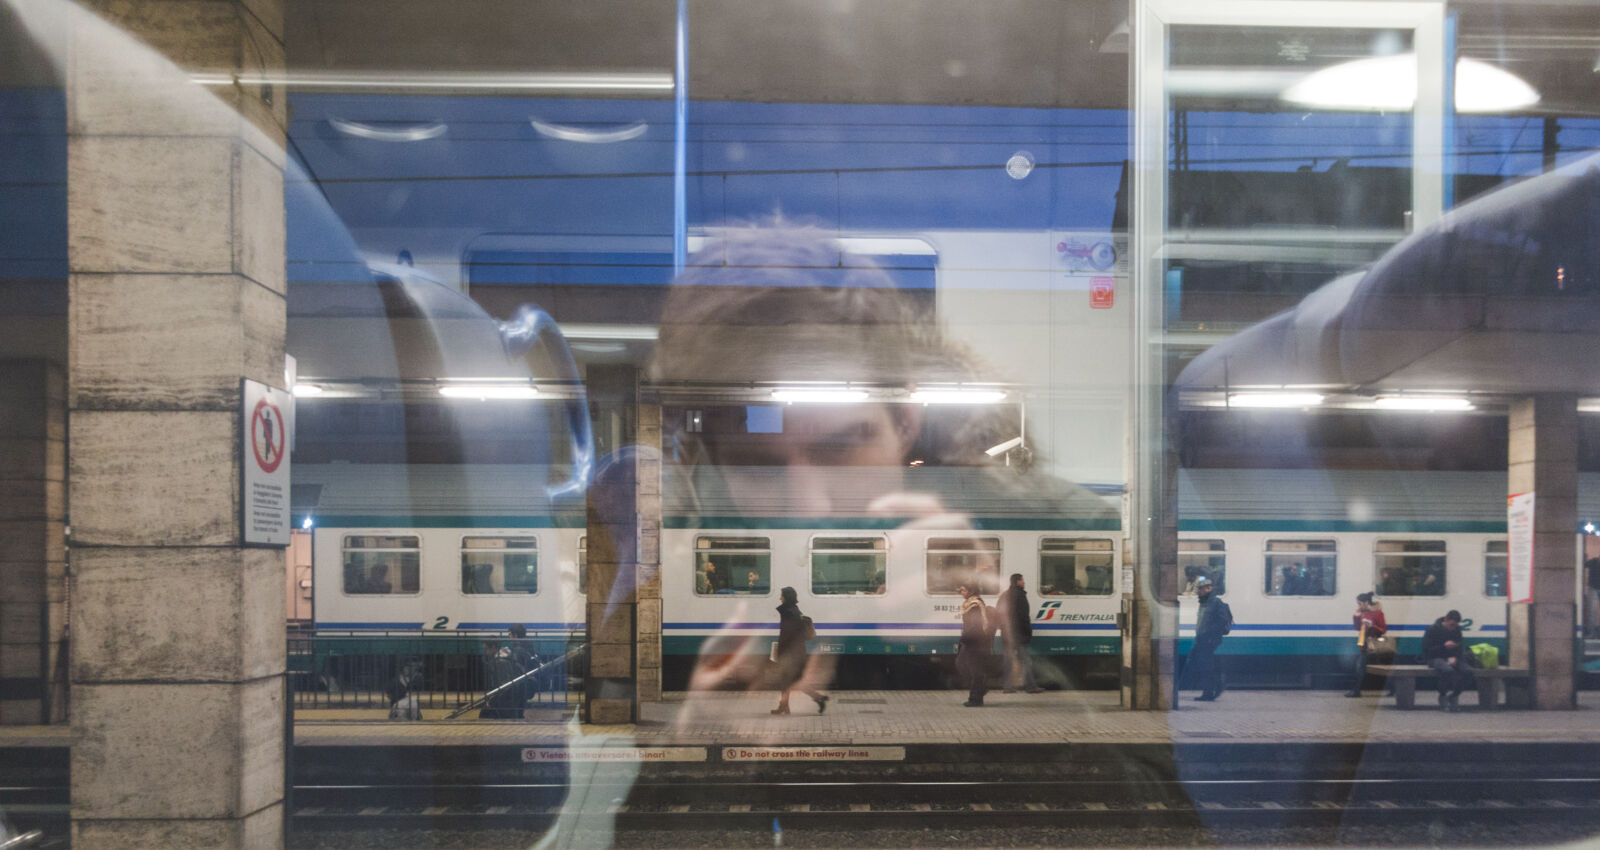 Samsung NX1000 sample photo. Station, today, train, travelling photography